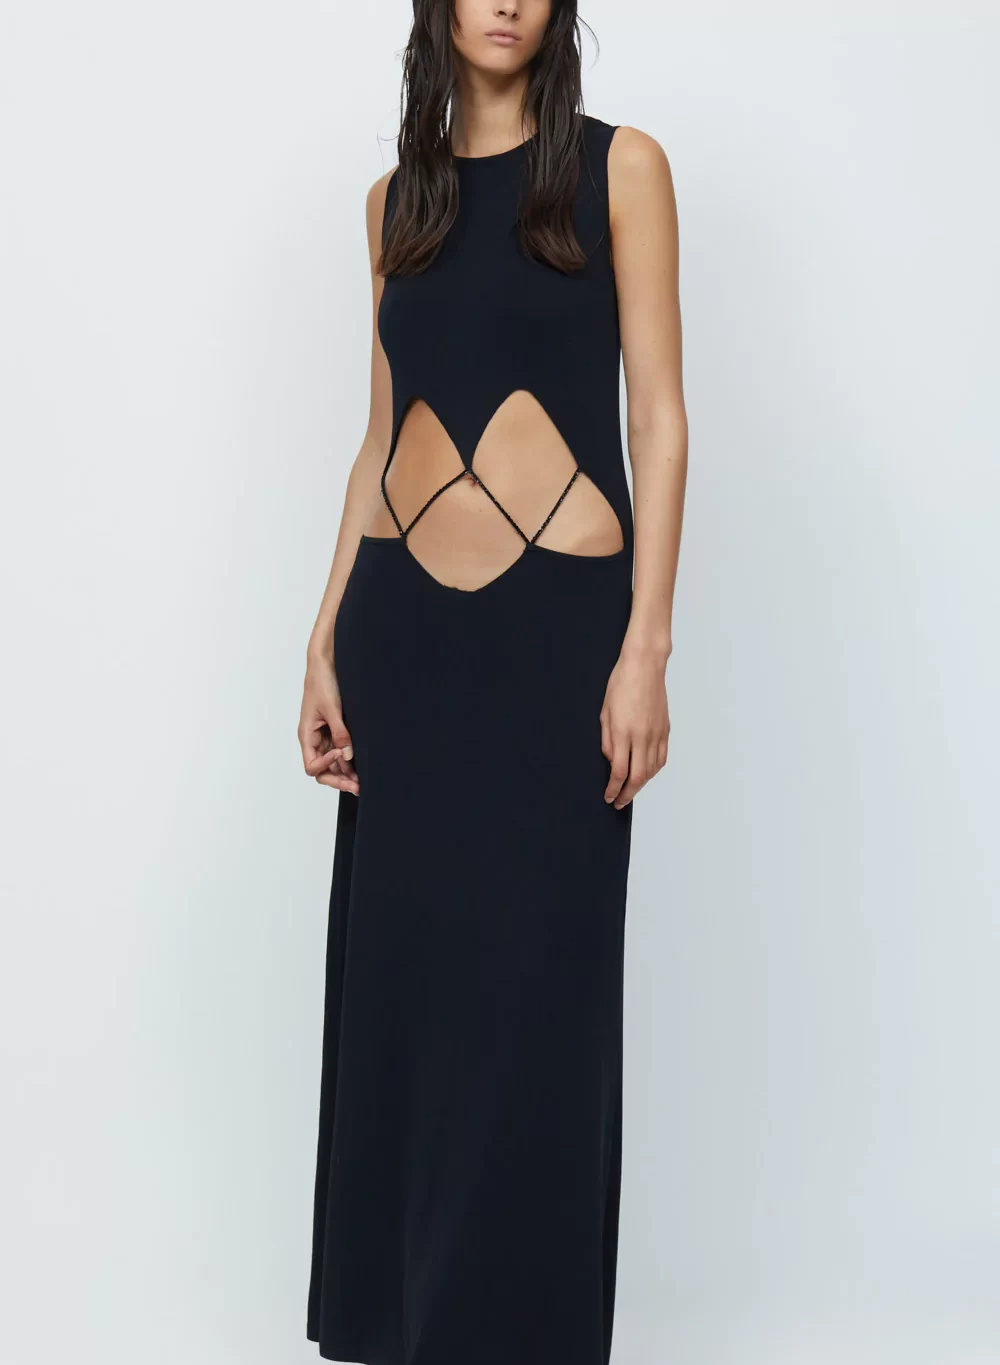 Bec and Bridge Skylar Suspend Knit Maxi Dress for rent. Black sleeveless maxi with front cut out.